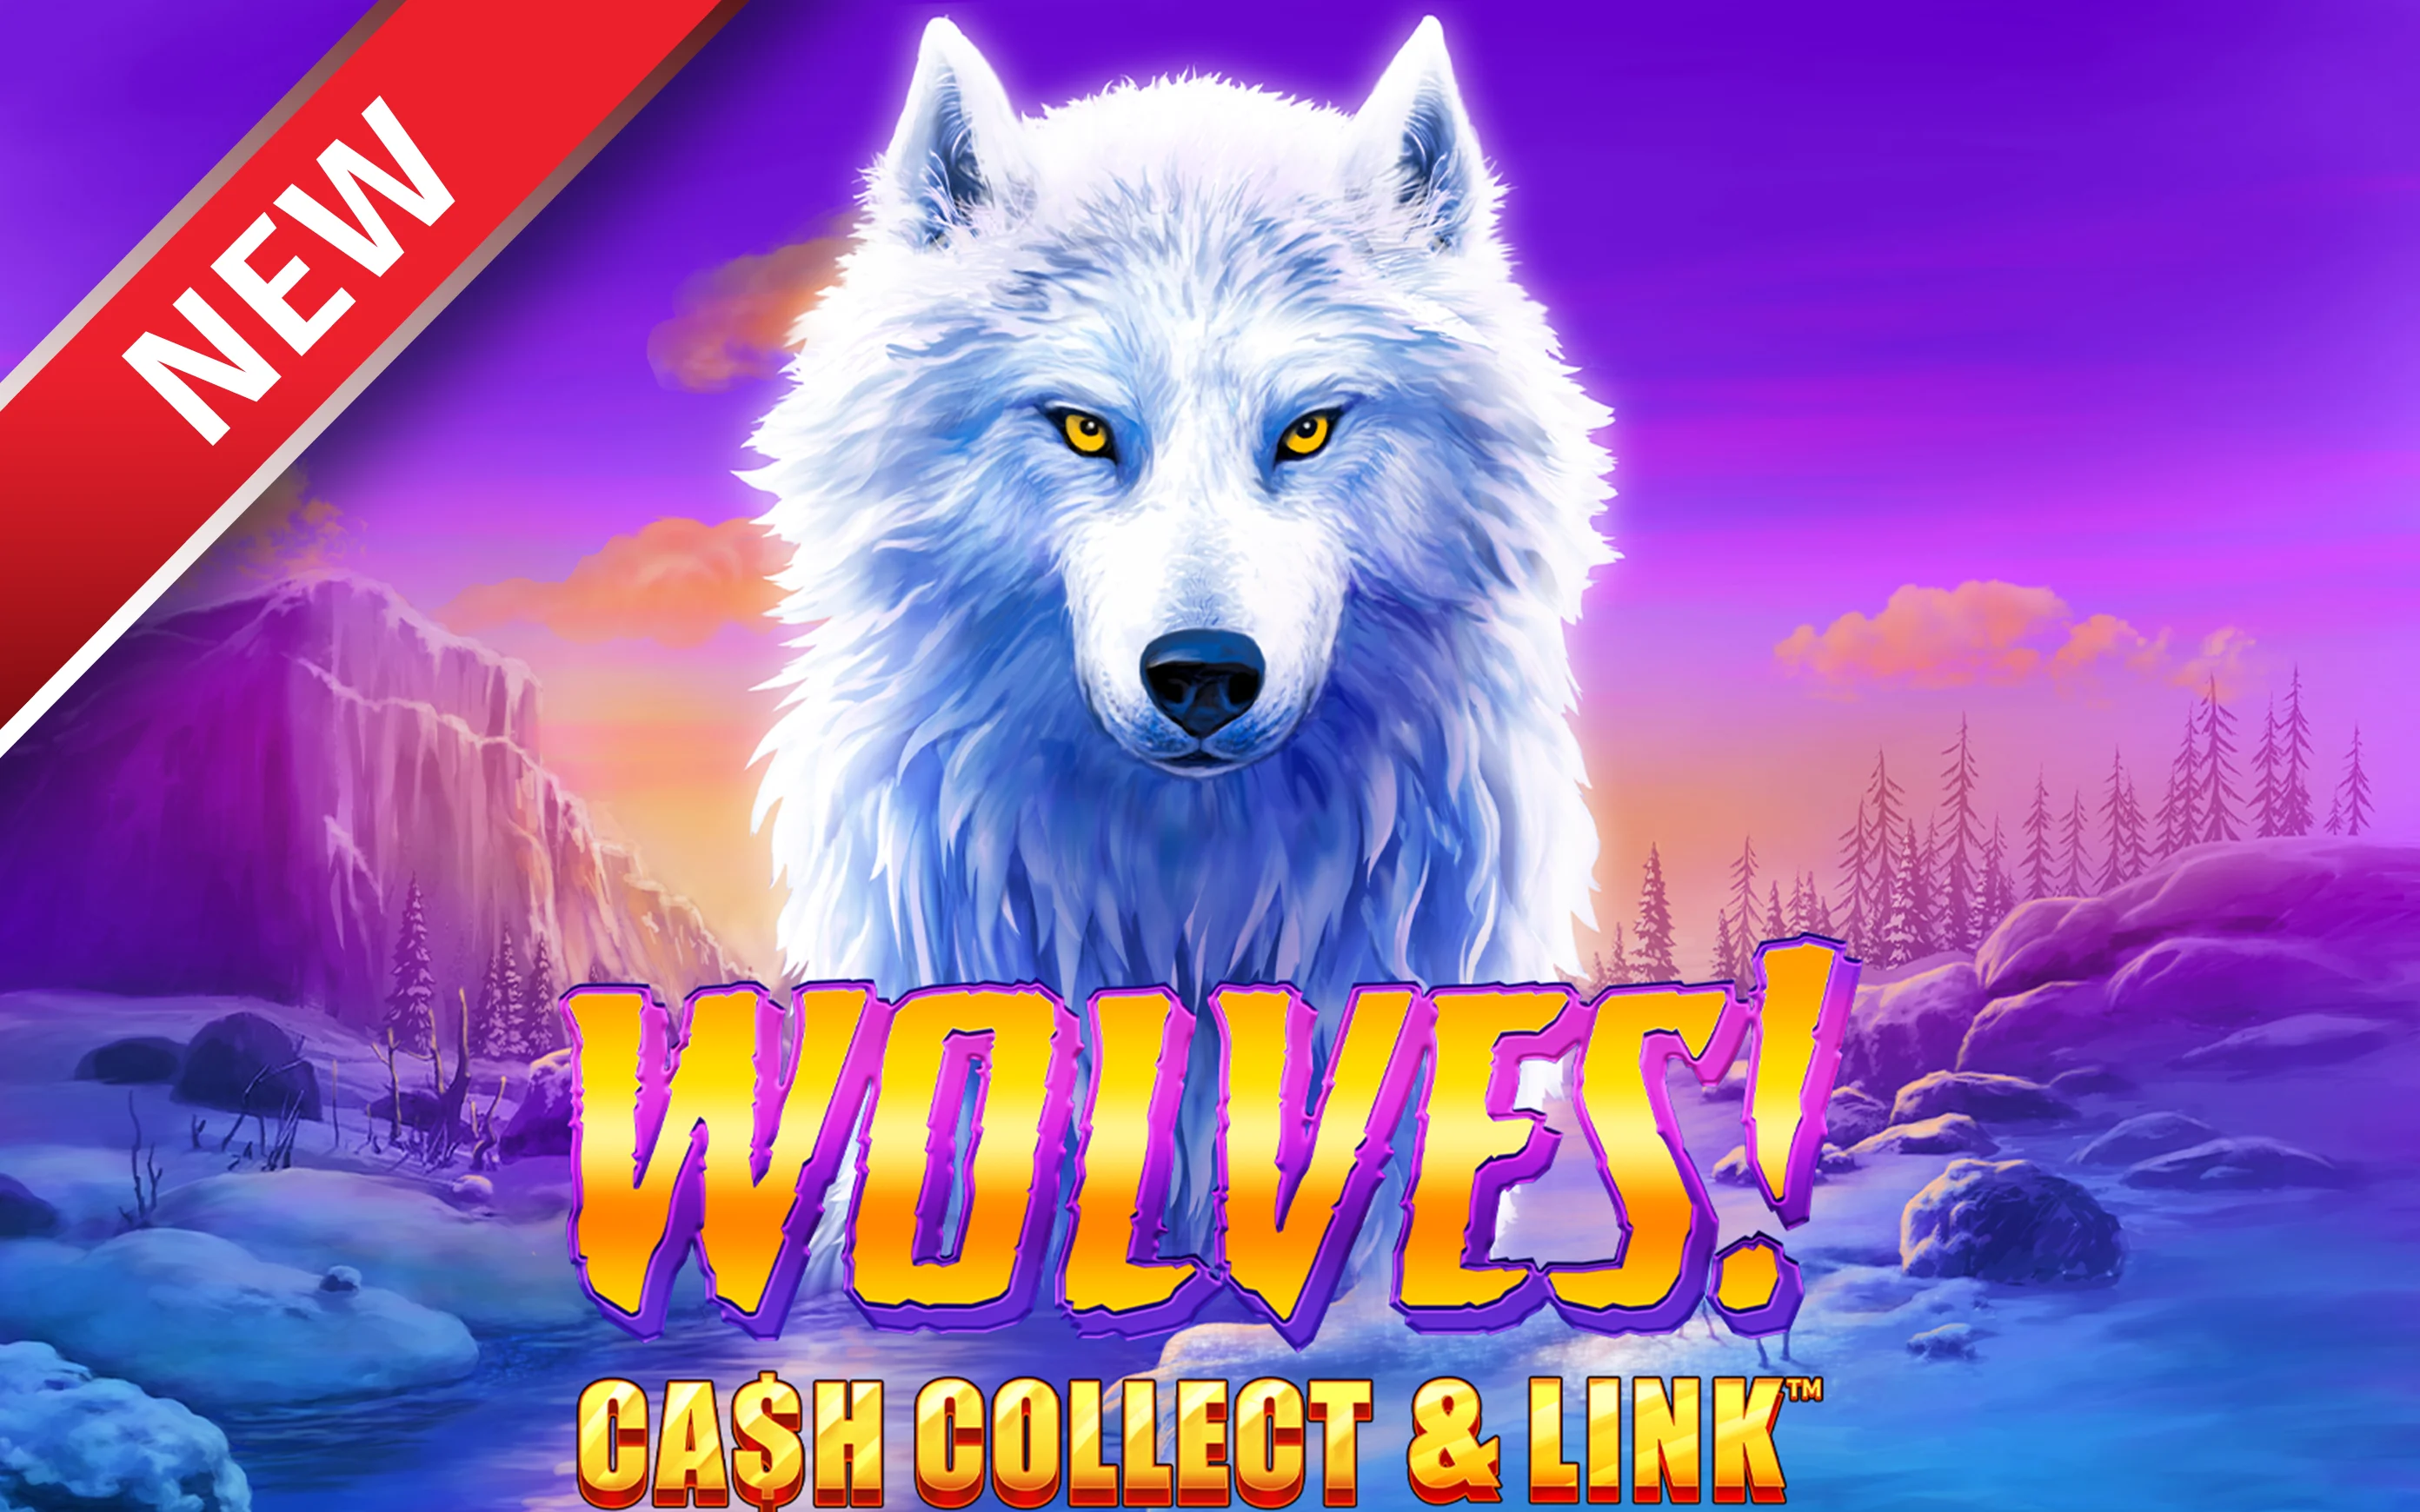 Jogue Wolves! Cash Collect & Link™ no casino online Starcasino.be 